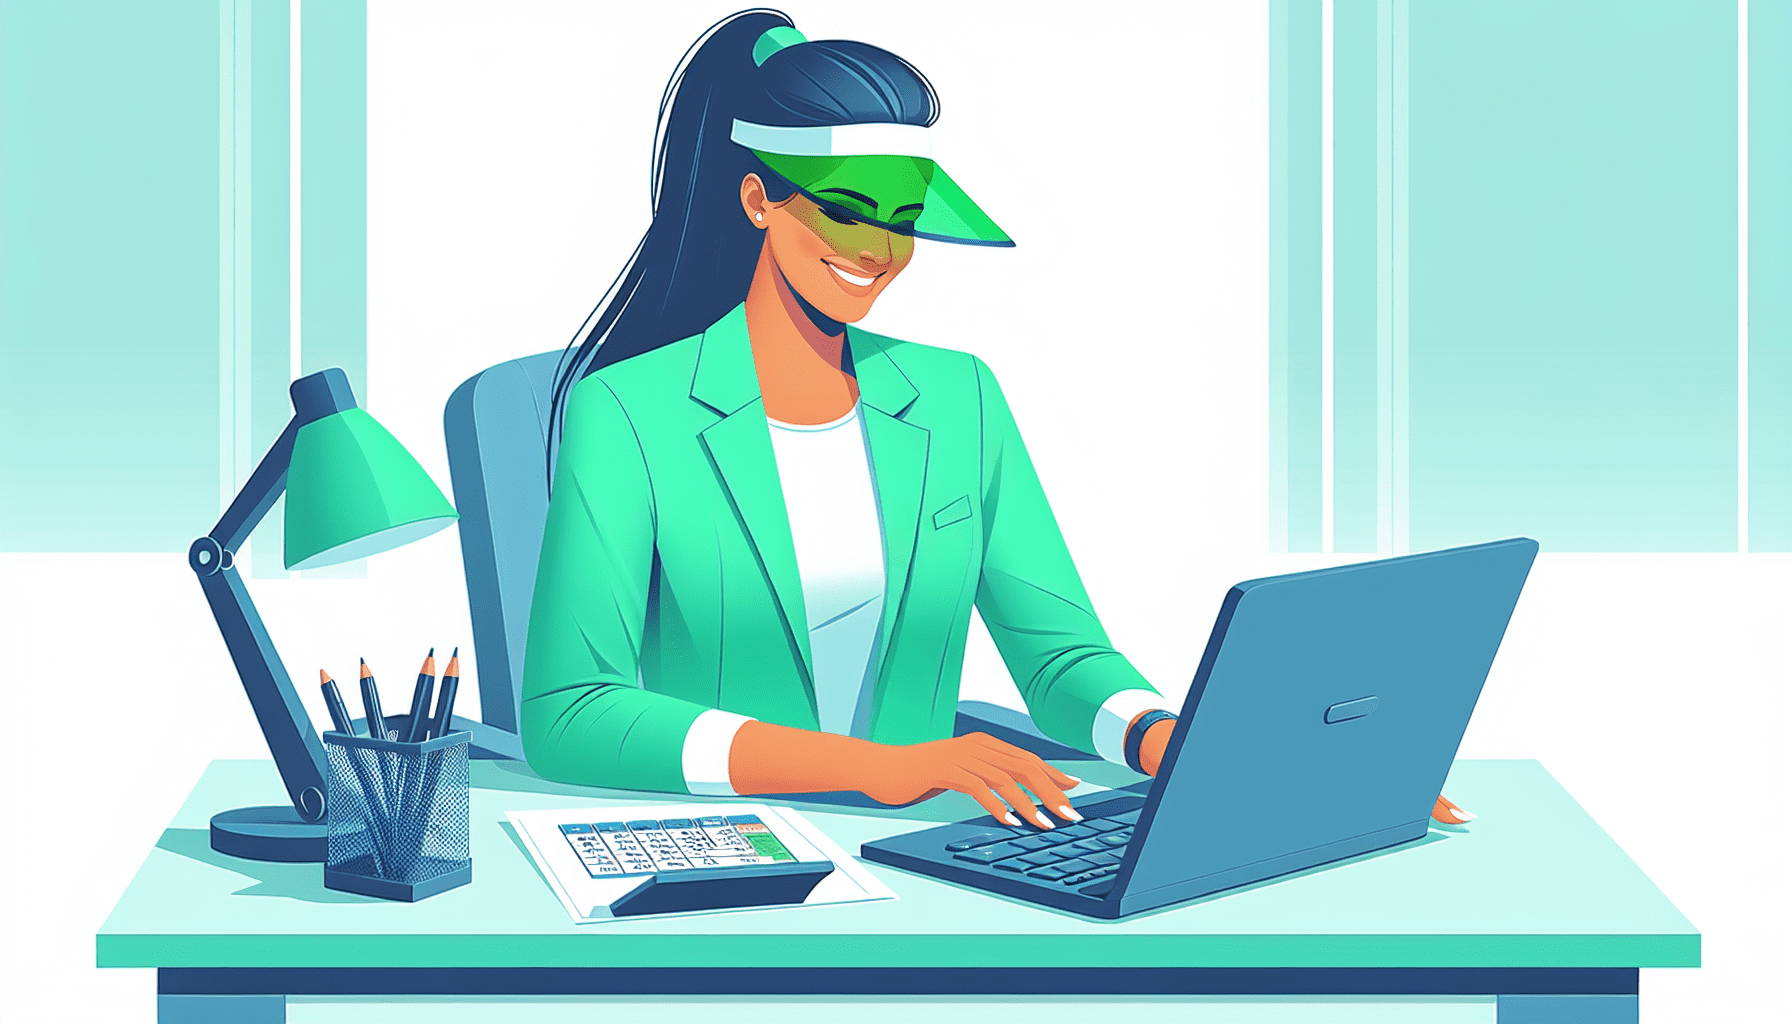 A businesswoman wearing a green visor and sitting at a desk smiles as she uses QuickBooks software on a laptop.